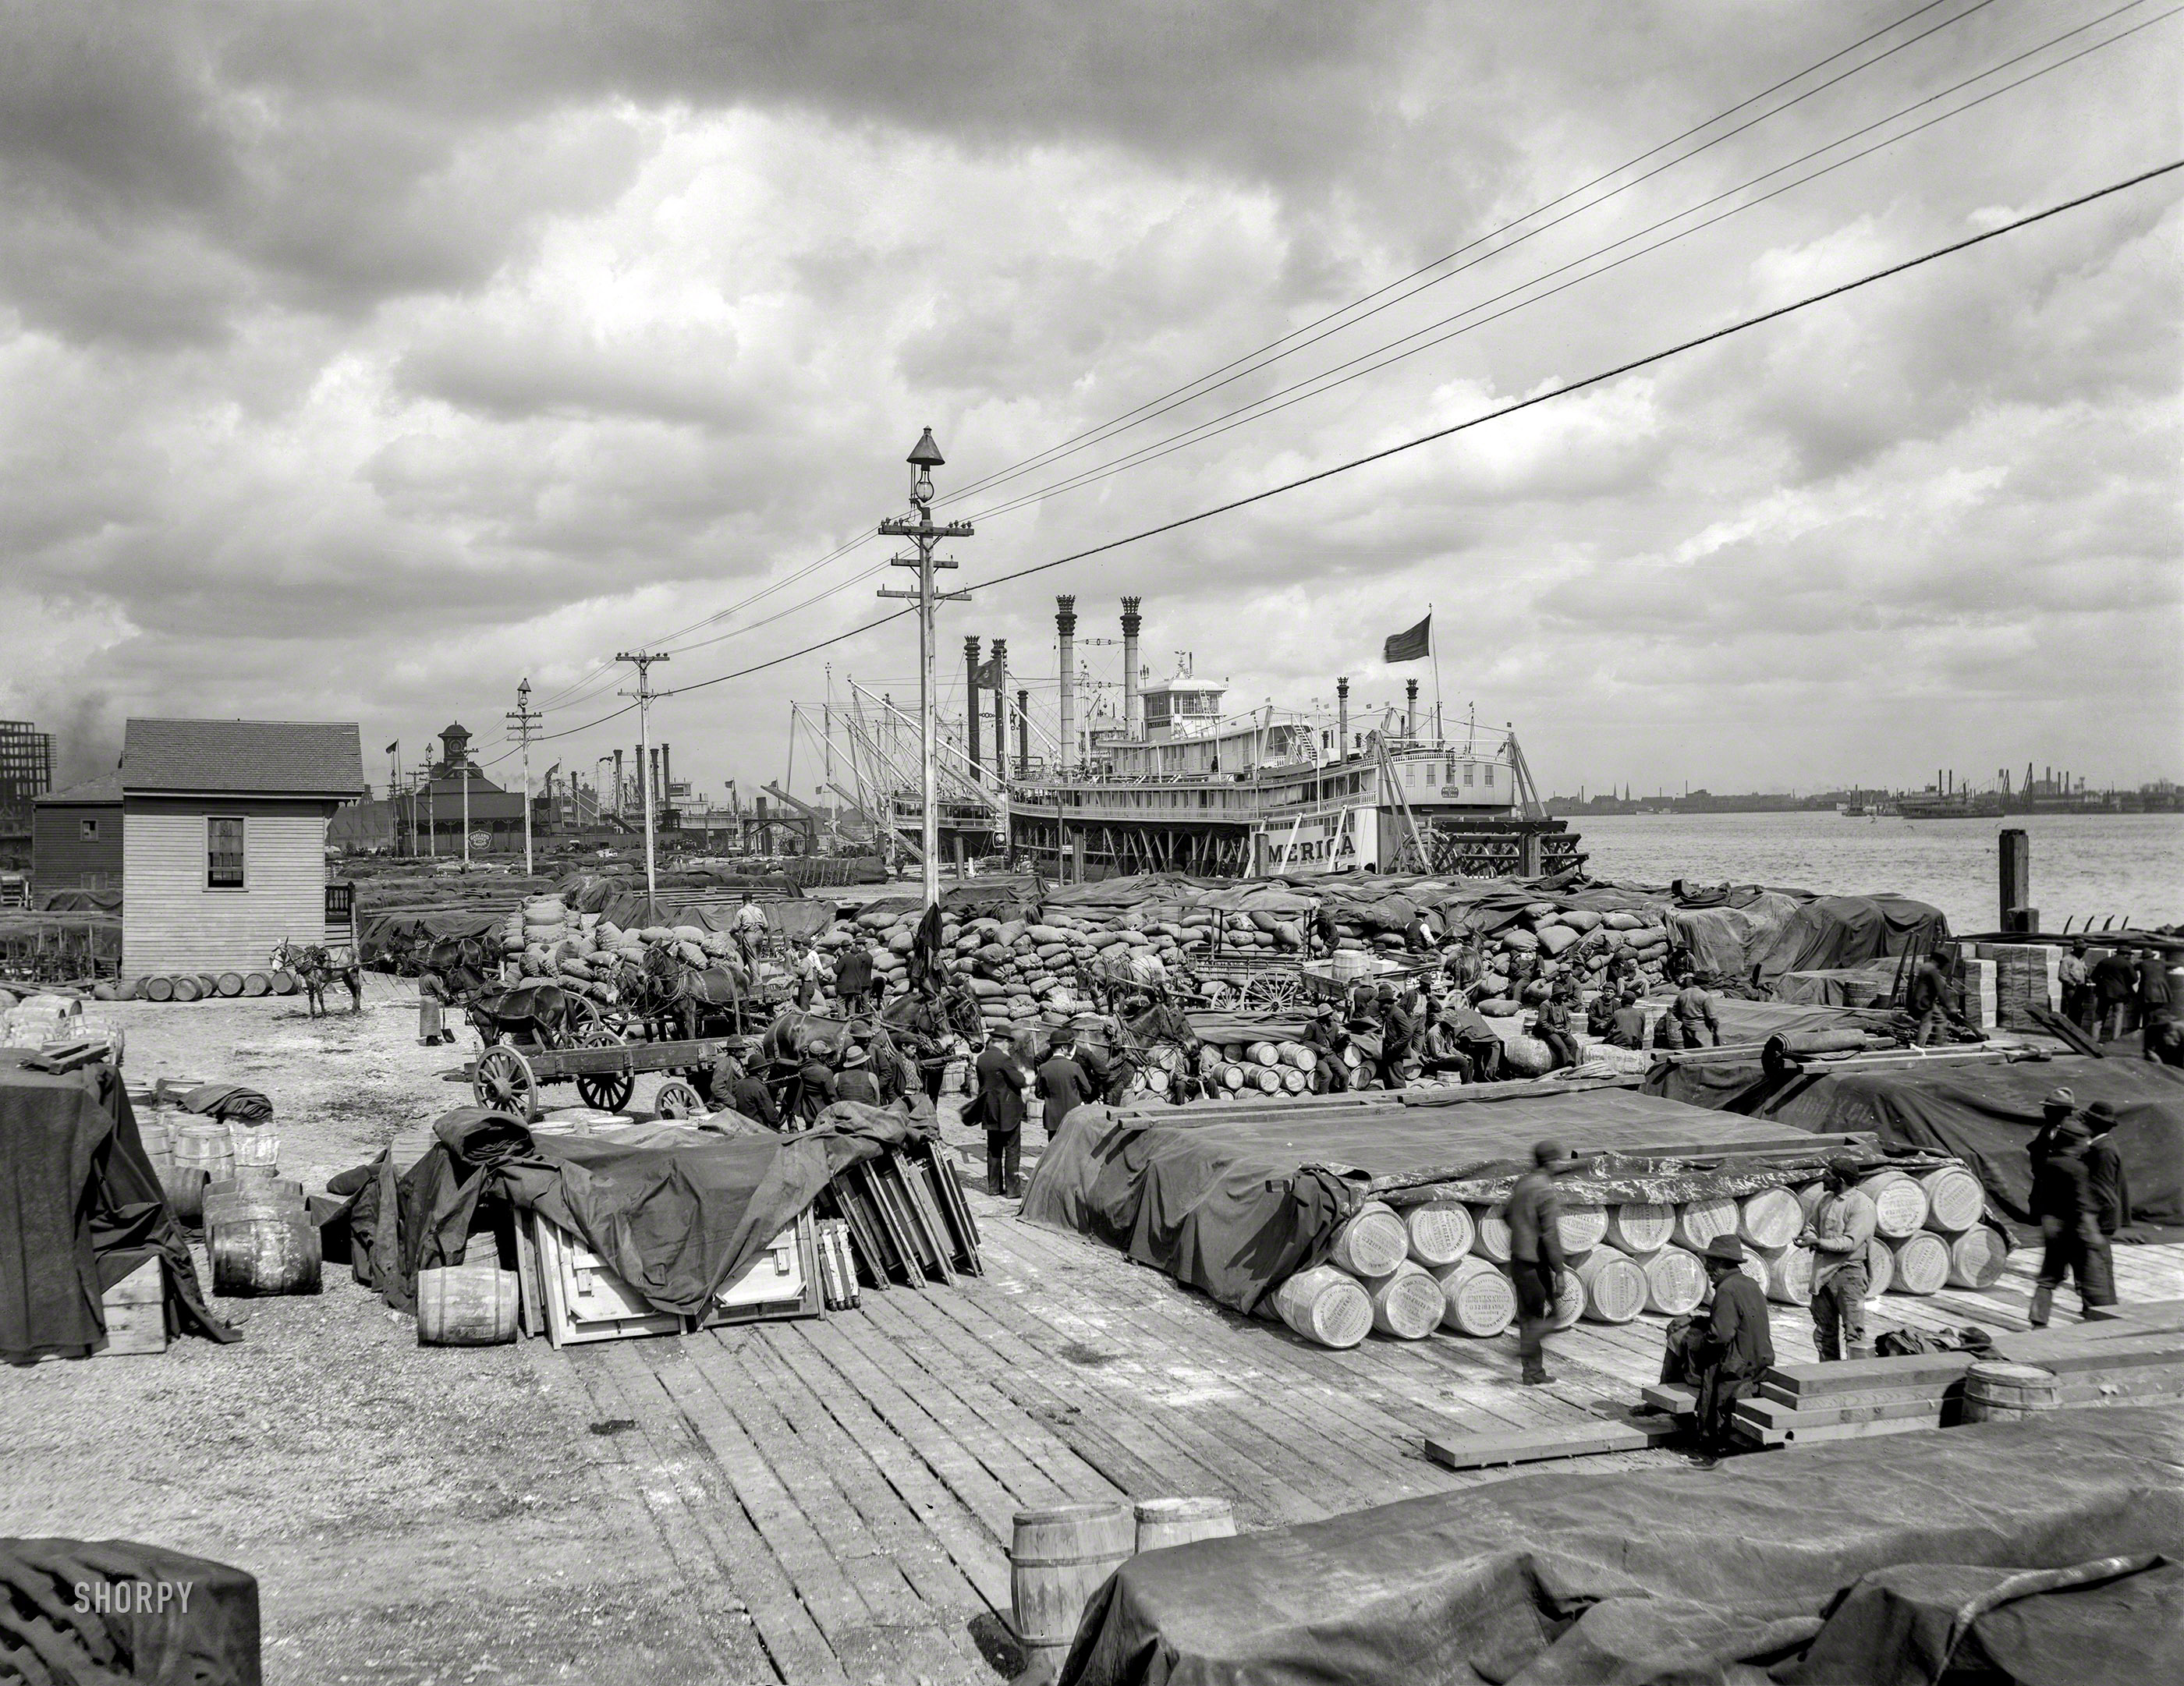 New Orleans circa 1900. "Foot of Canal Street -- Riverboat at the levee." The sternwheeler America of Galena, Illinois. 8x10 glass negative. View full size.